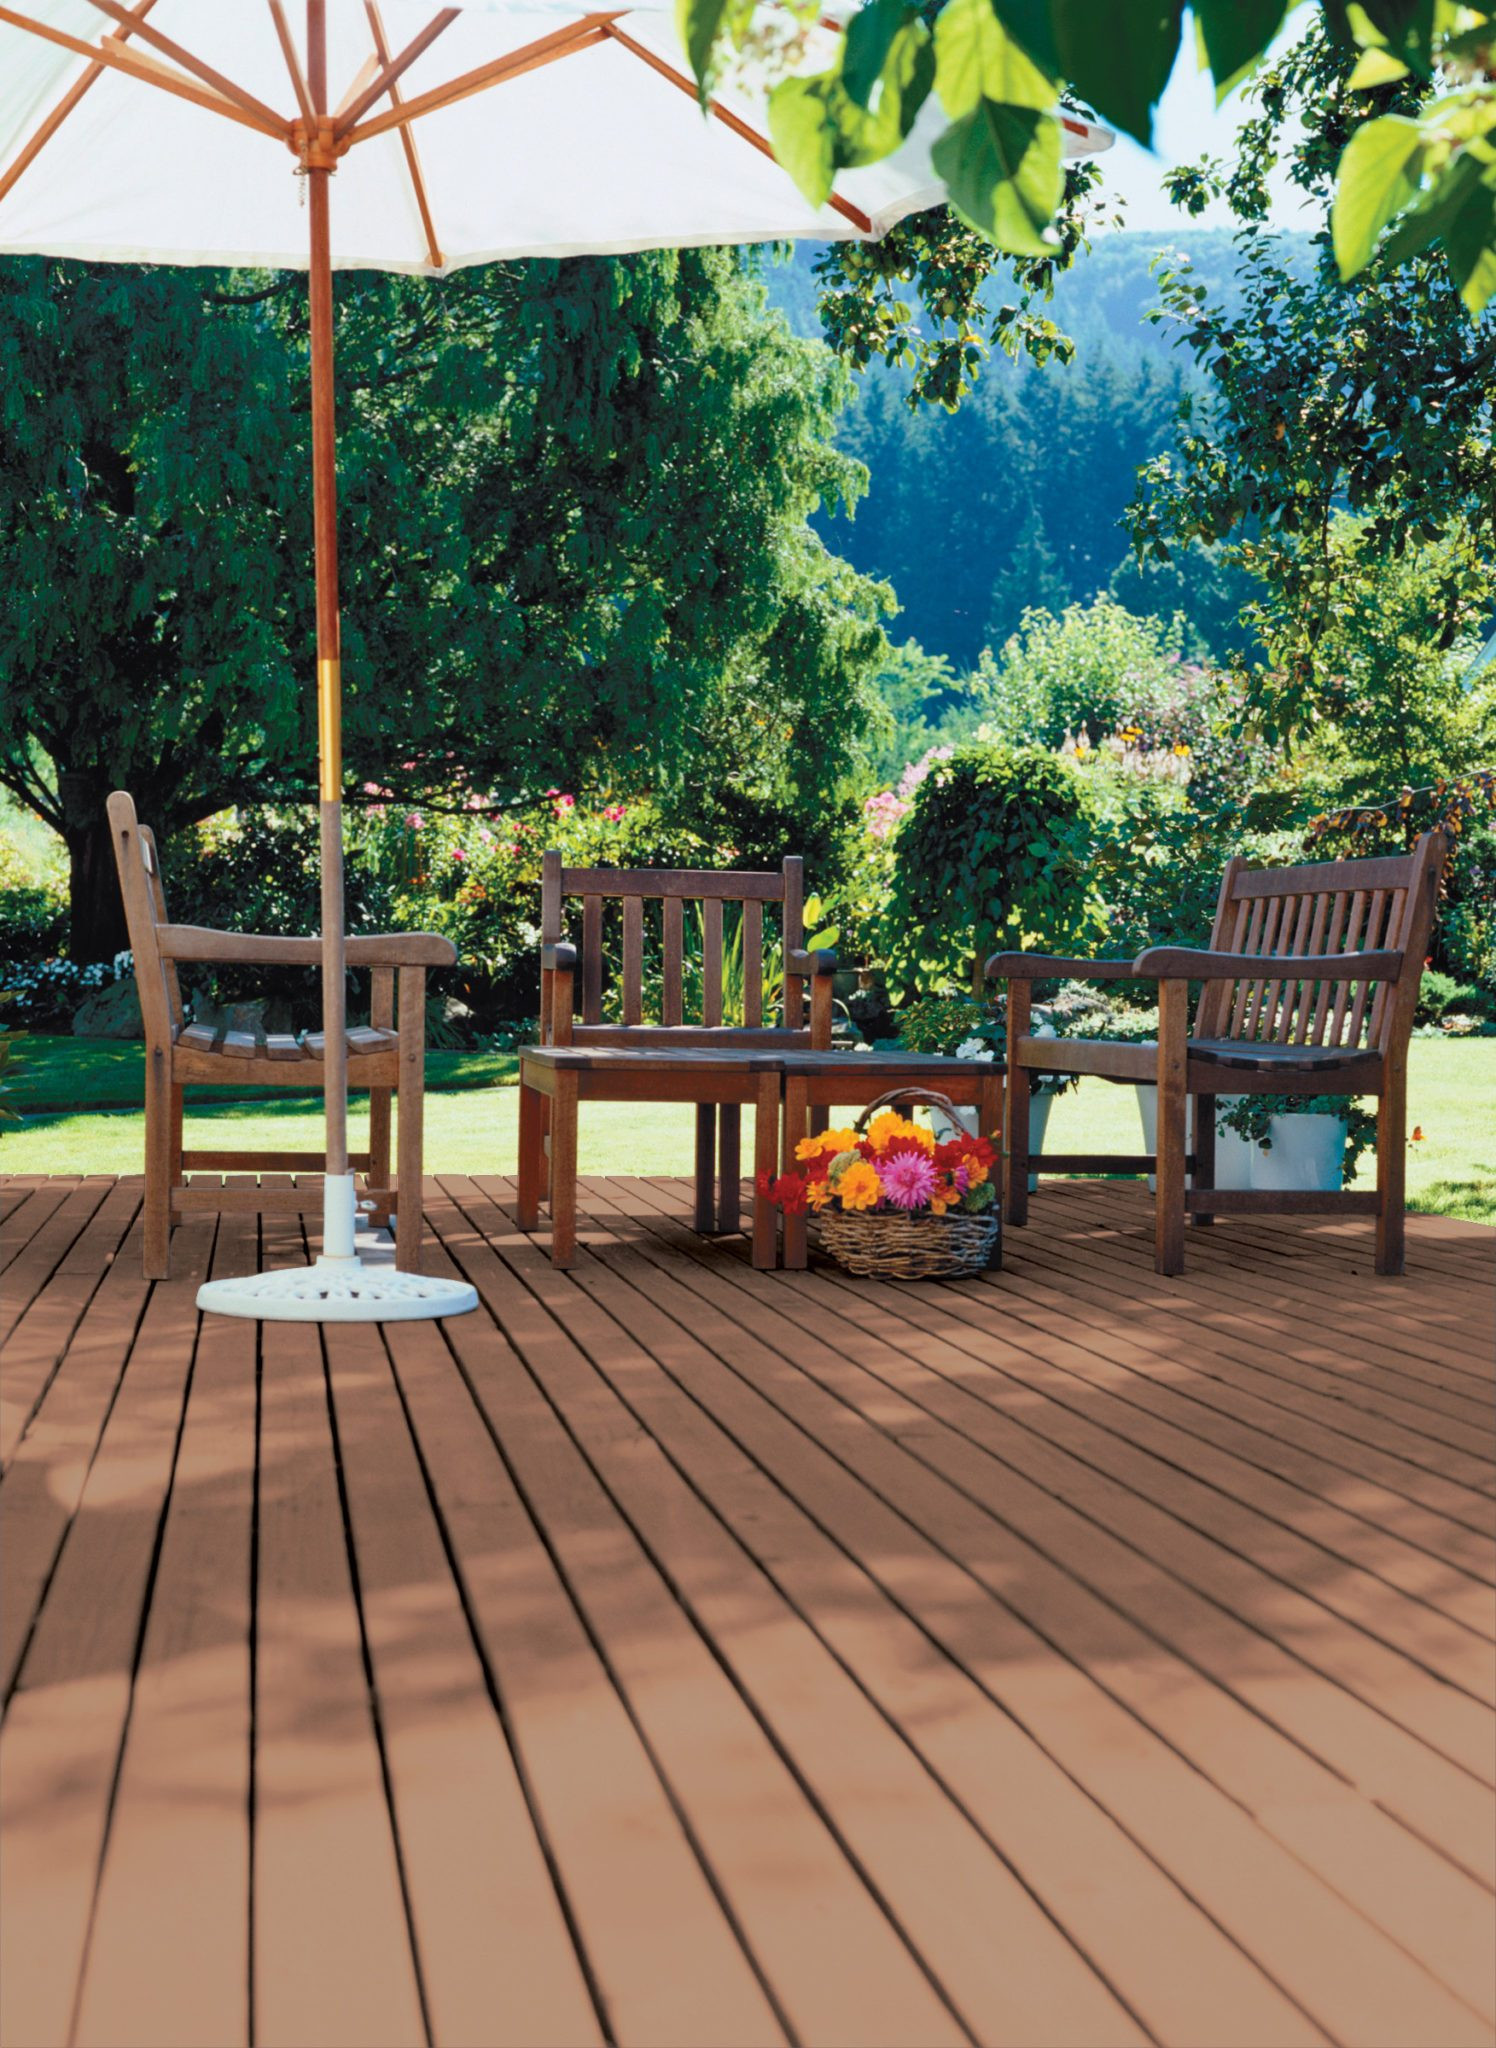 Sherwin Williams Deck Paint Reviews
 Deck Sherwin Williams Superdeck Applied To Your Home